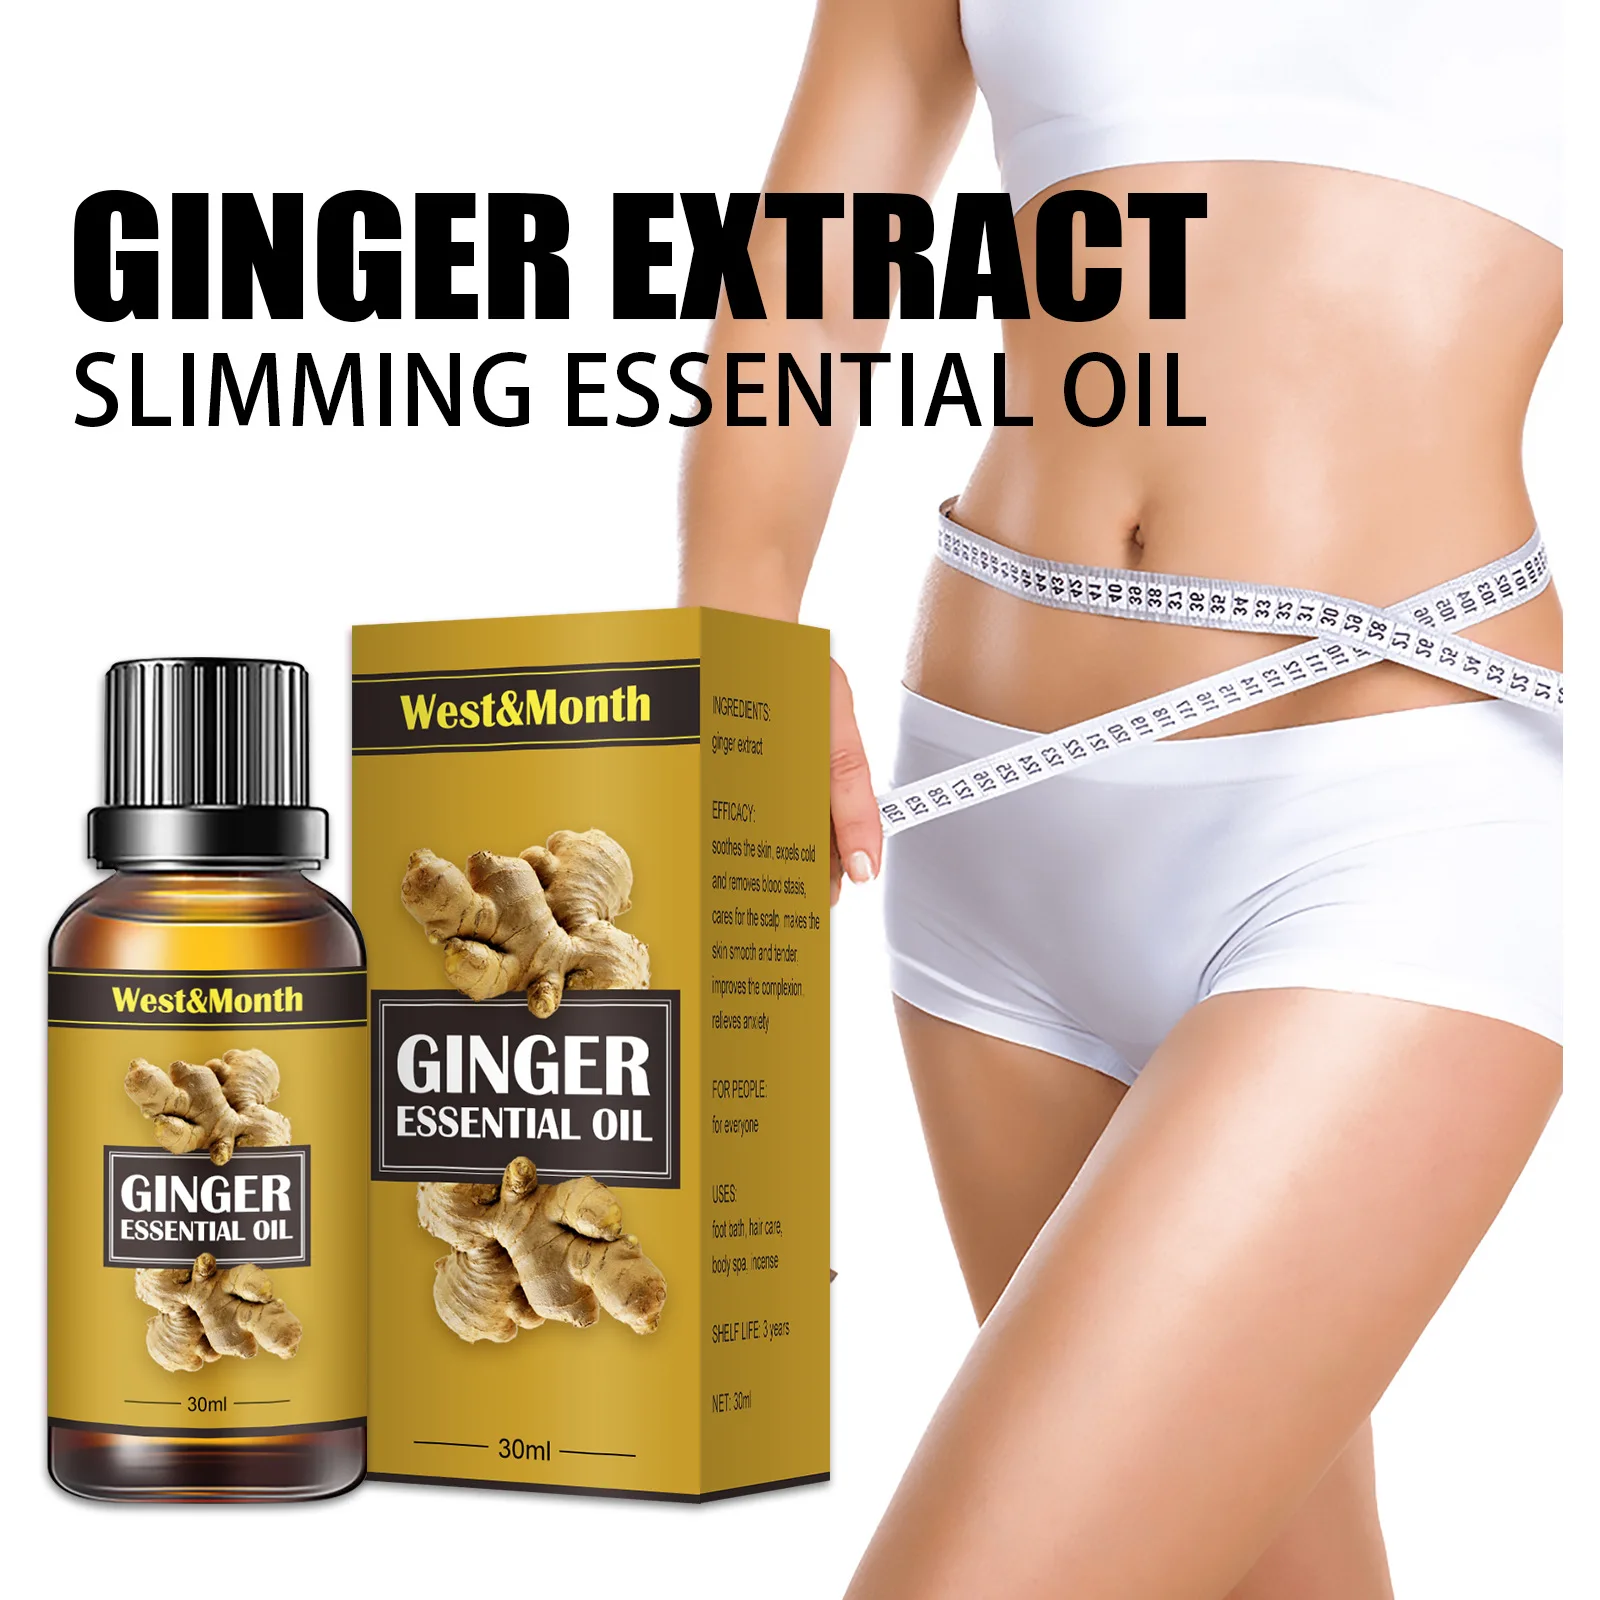 

Ginger Slimming Essential Oil Lifting Firming Hip Lift Up Moisturizing Fat Burner Lose Weight Massage Spa Relieves Stress Oil